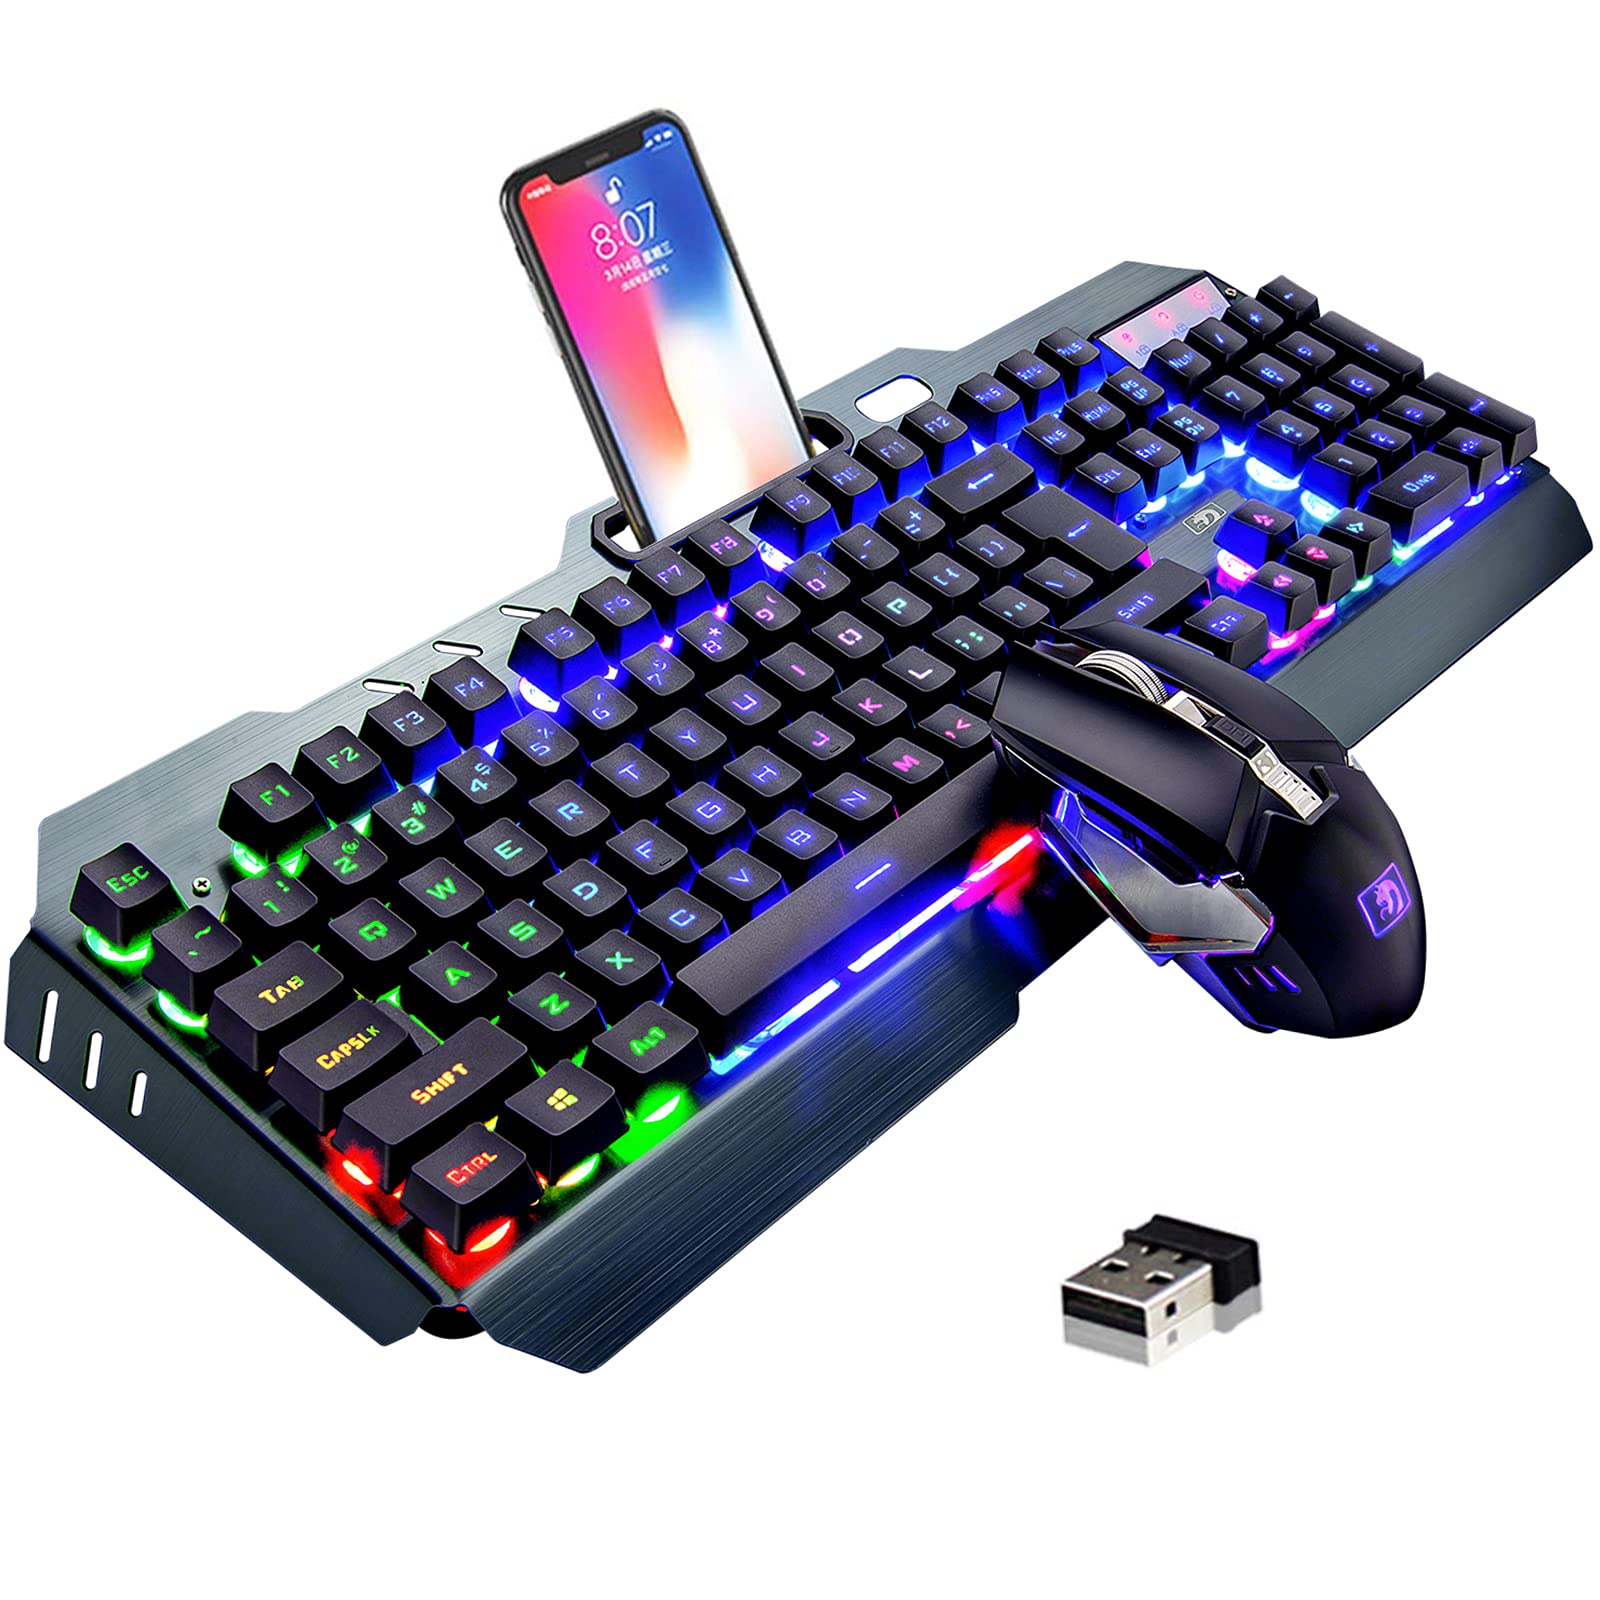 Mua Wireless Gaming Keyboard and Mouse,Rainbow Backlit Rechargeable Keyboard  with 3800mAh Battery Metal Panel,Mechanical Feel Keyboard and 7 Color Mute  Gaming Mouse for Windows Computer Gamers(Rainbow) trên Amazon Mỹ chính hãng  2023 |